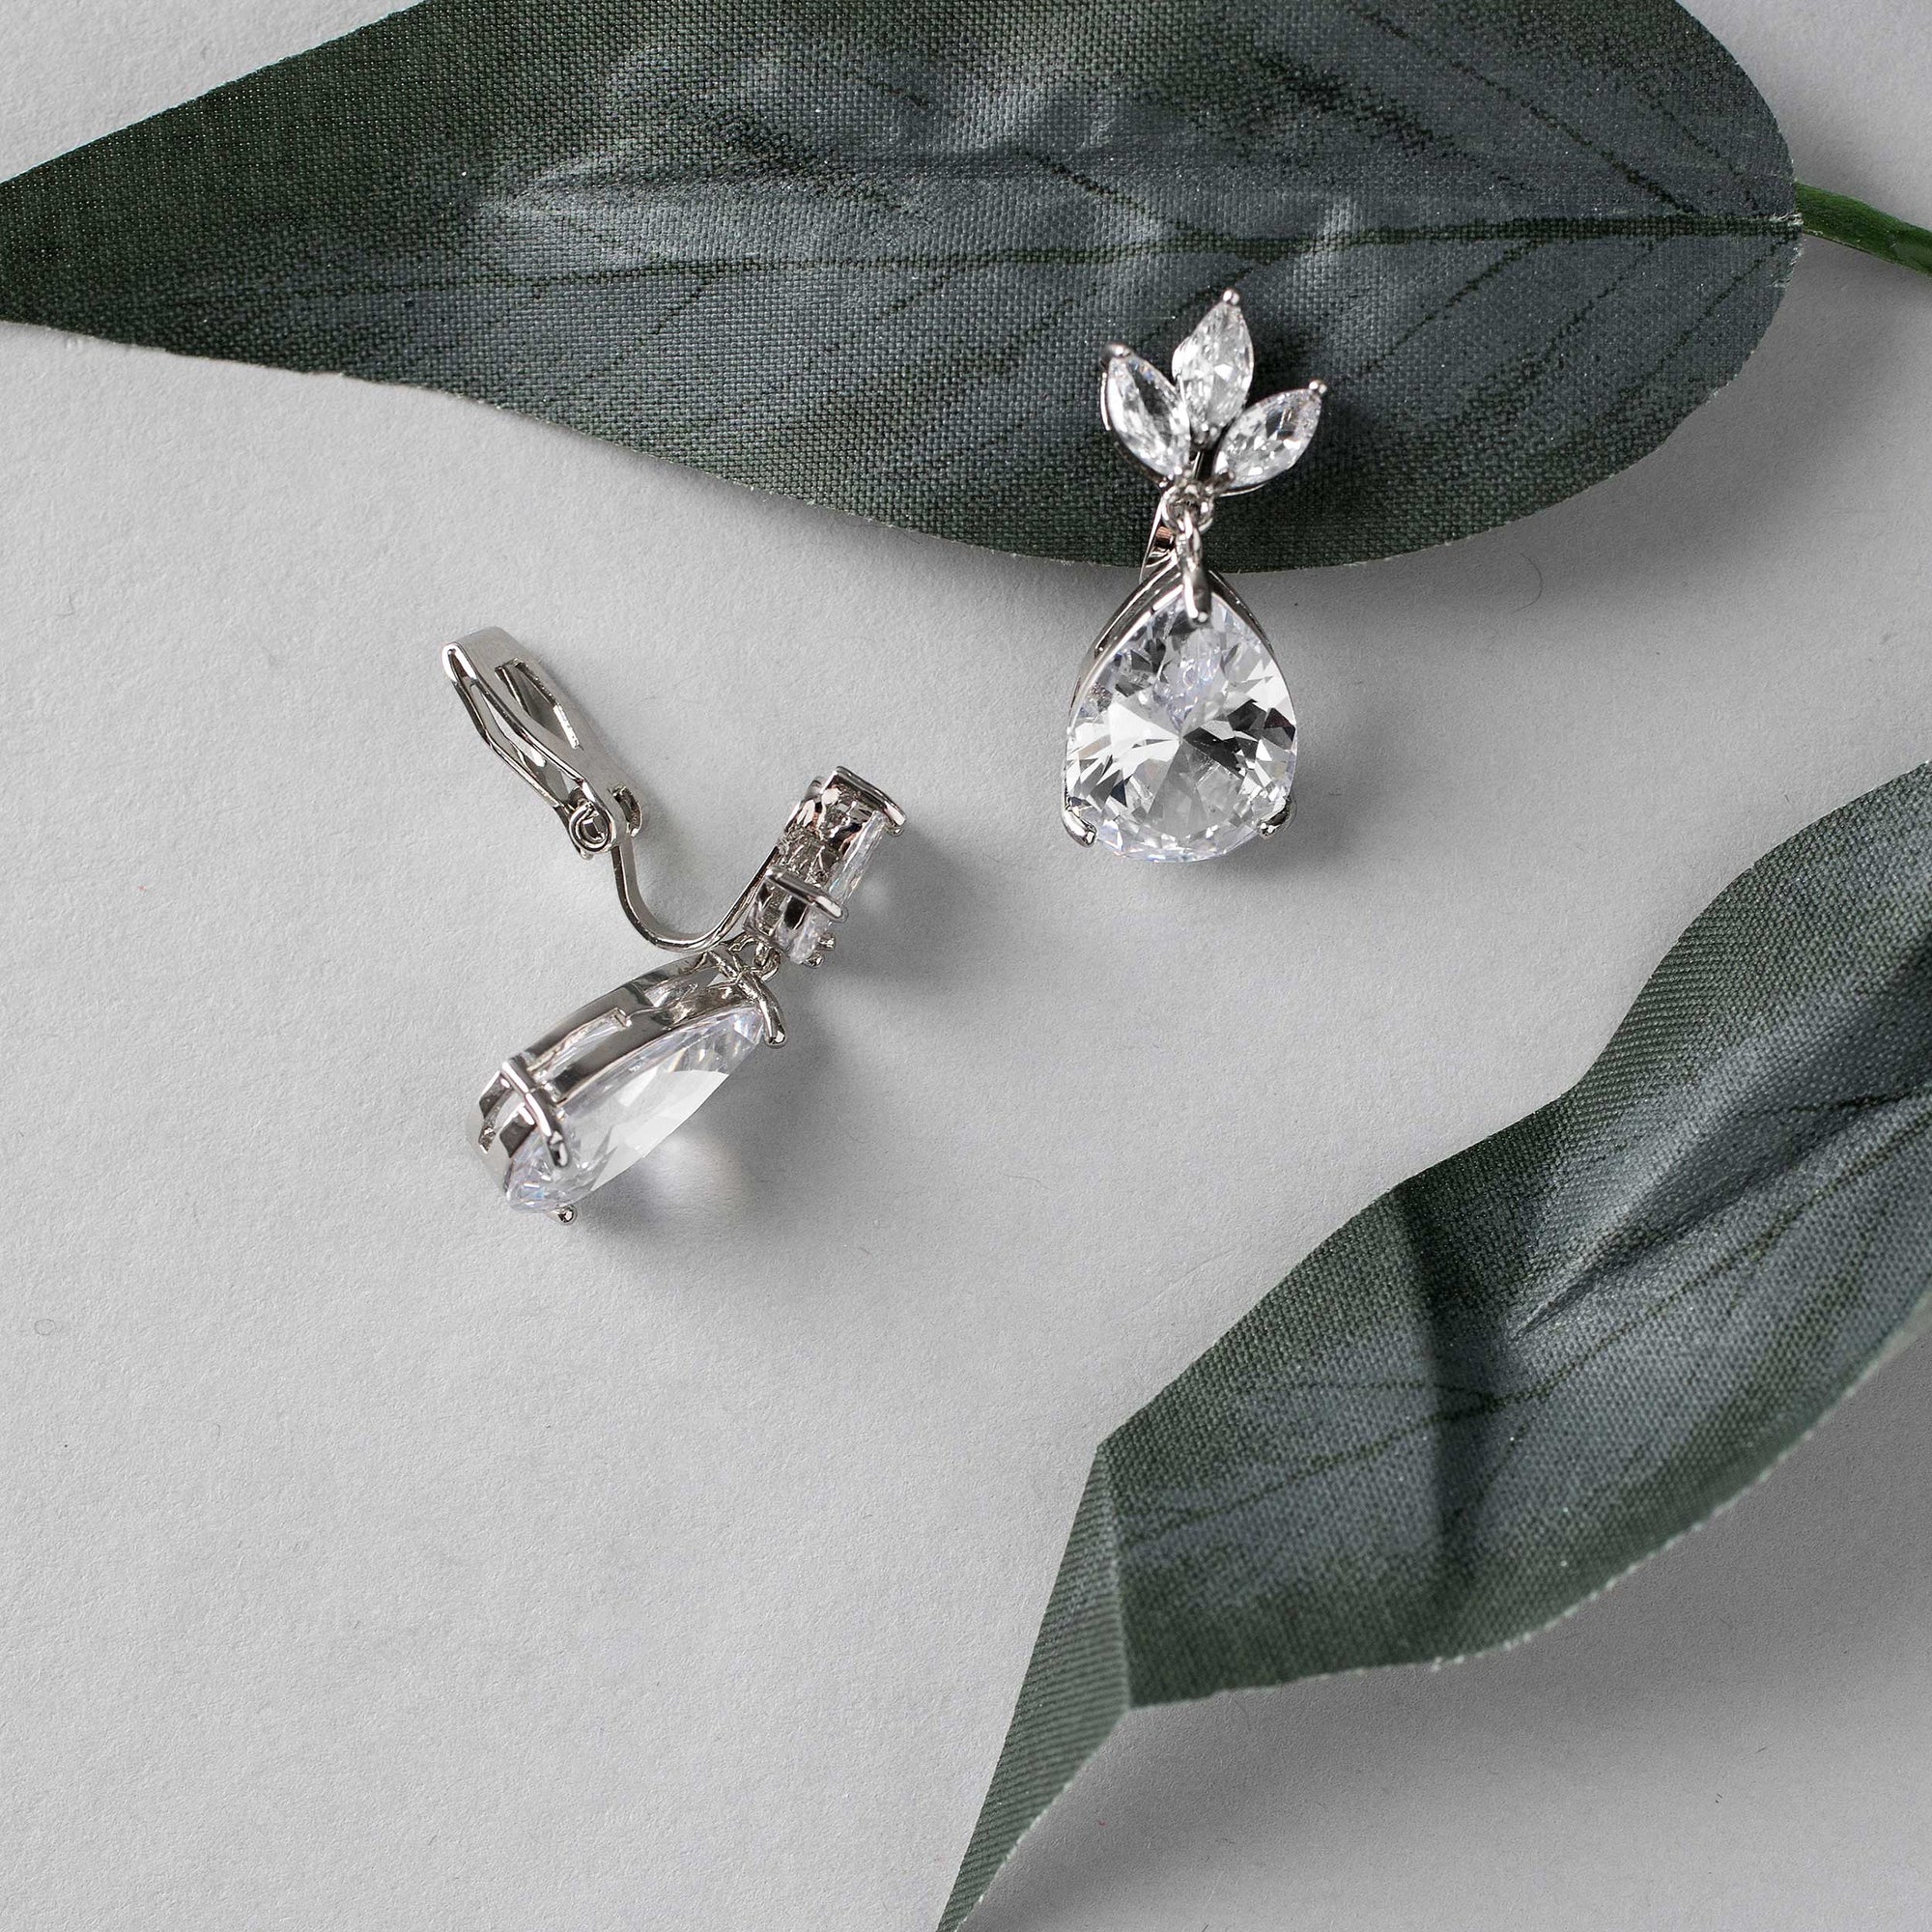 Clip-On Classic Wedding Earrings with CZ Pear Drop